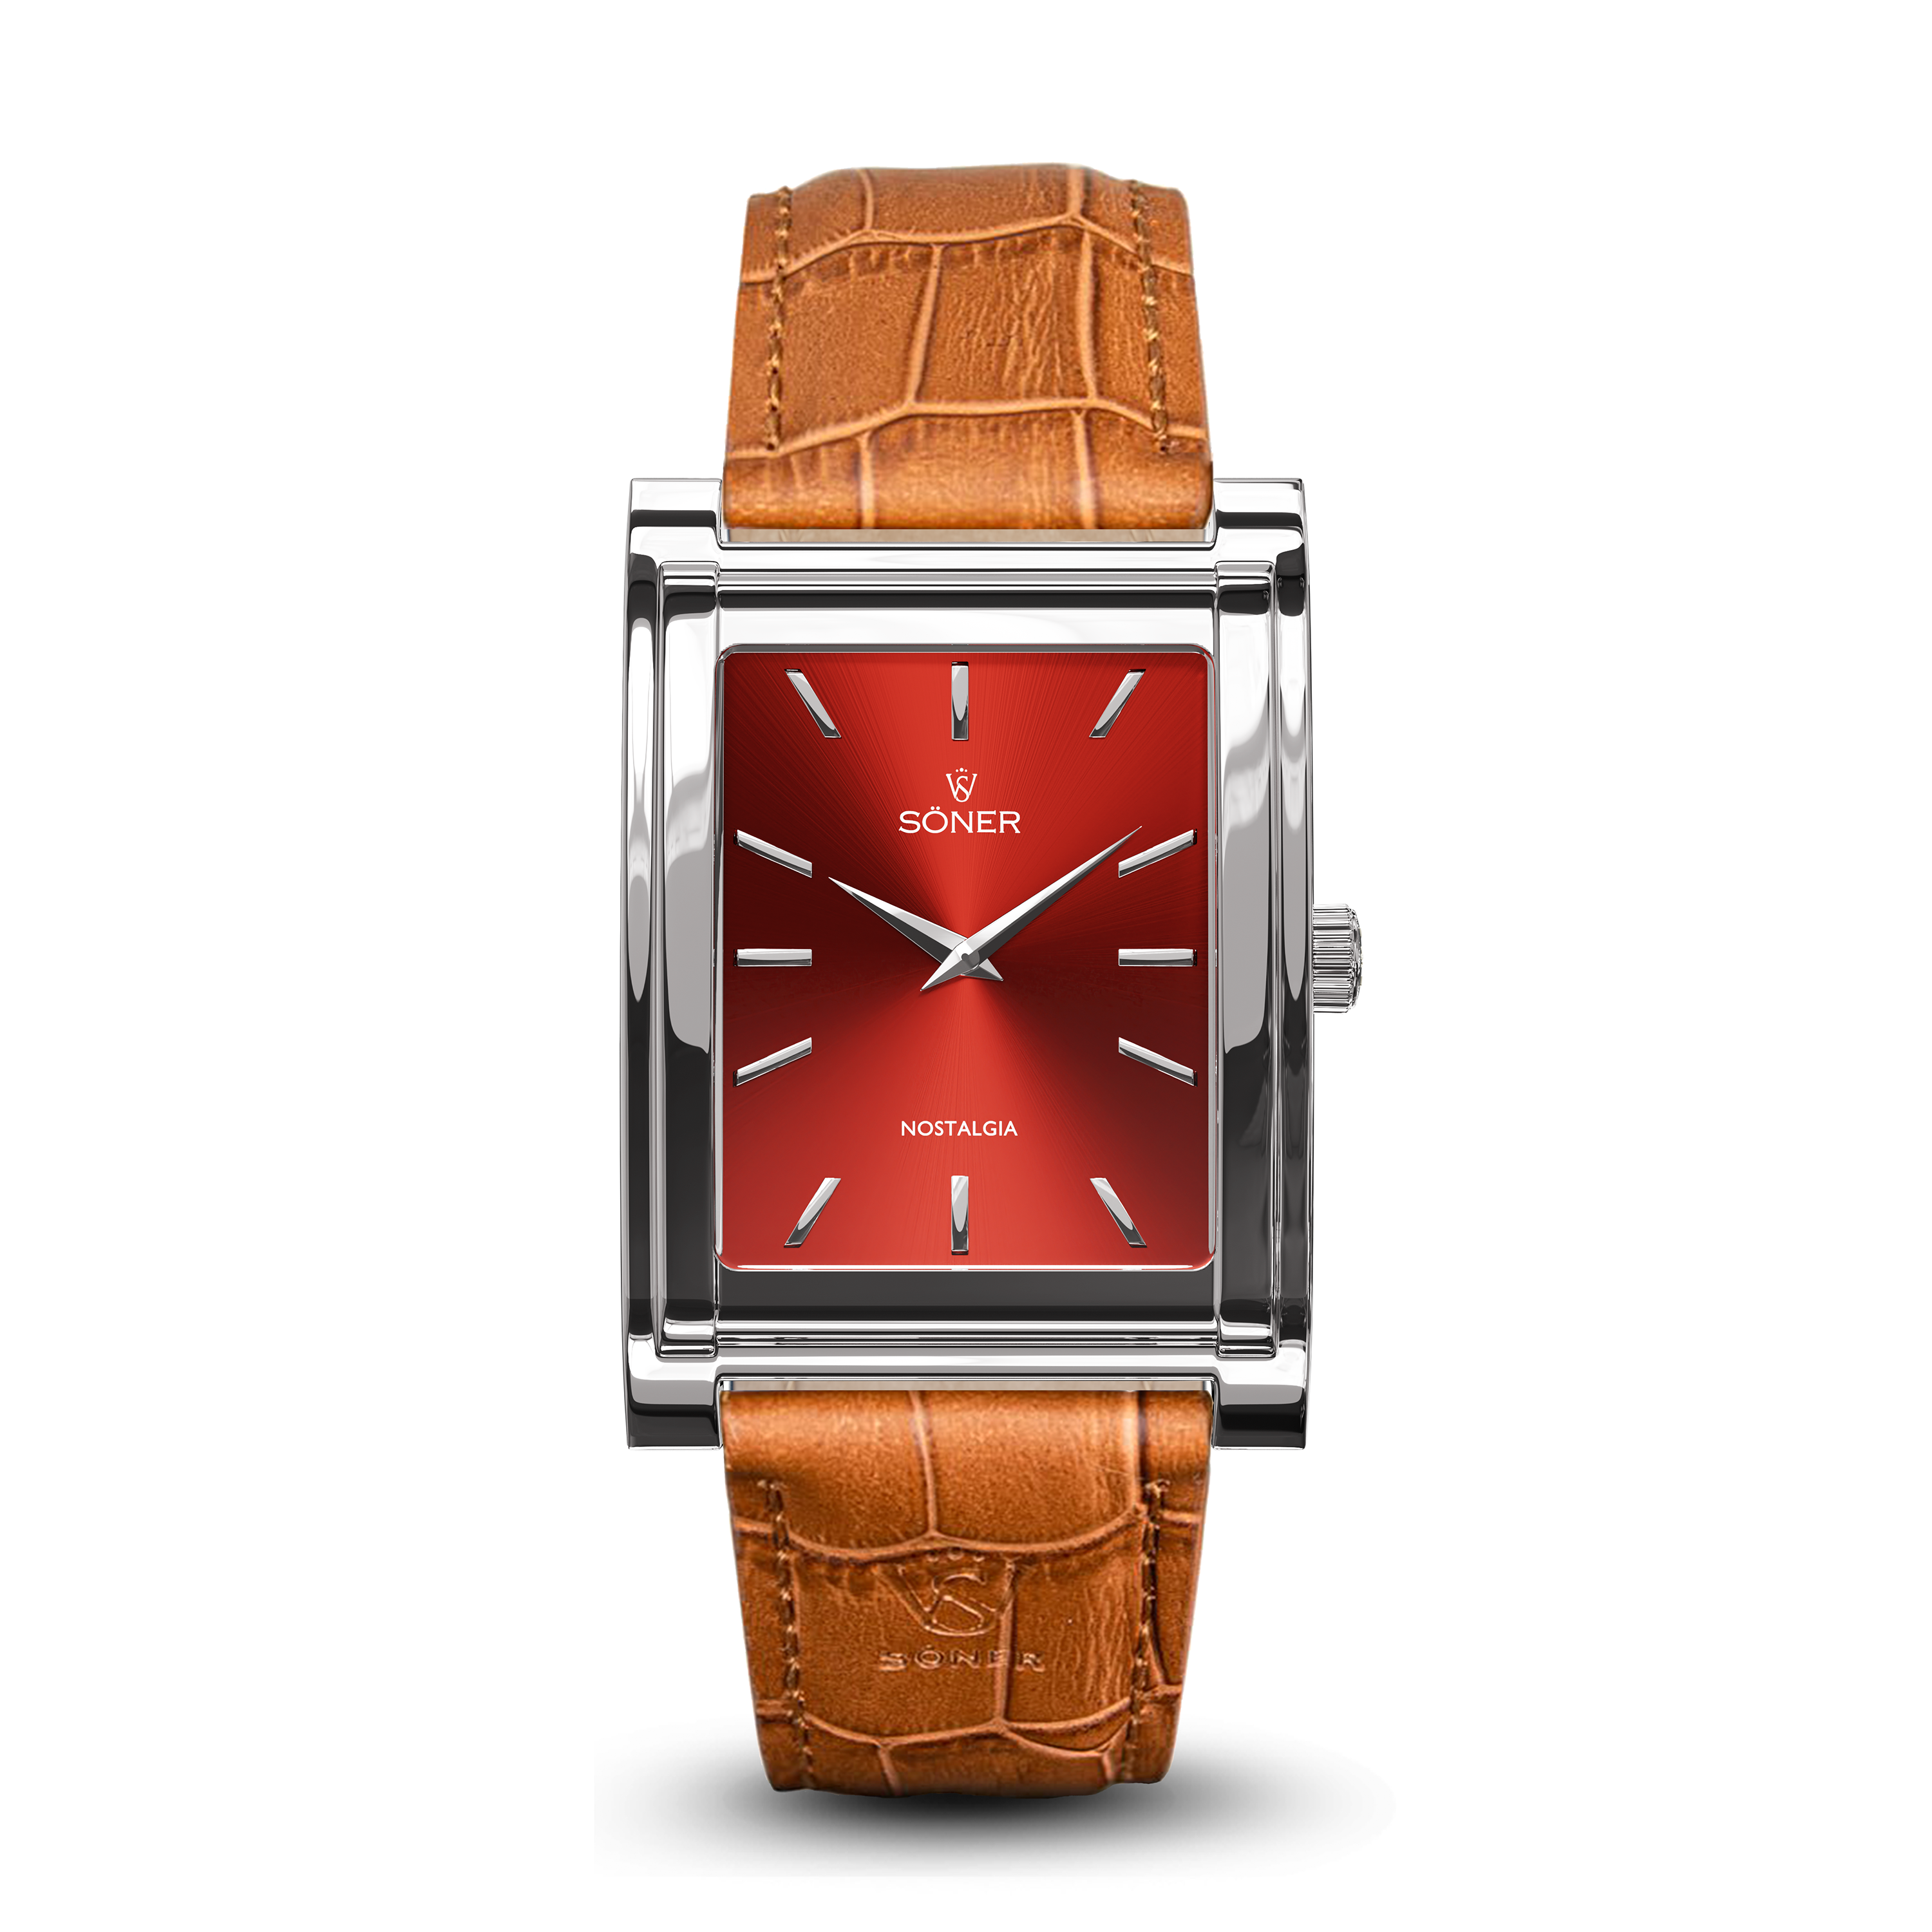 Square watch, Nostalgia Rome with red dial - light brown alligator pattern leather strap front view